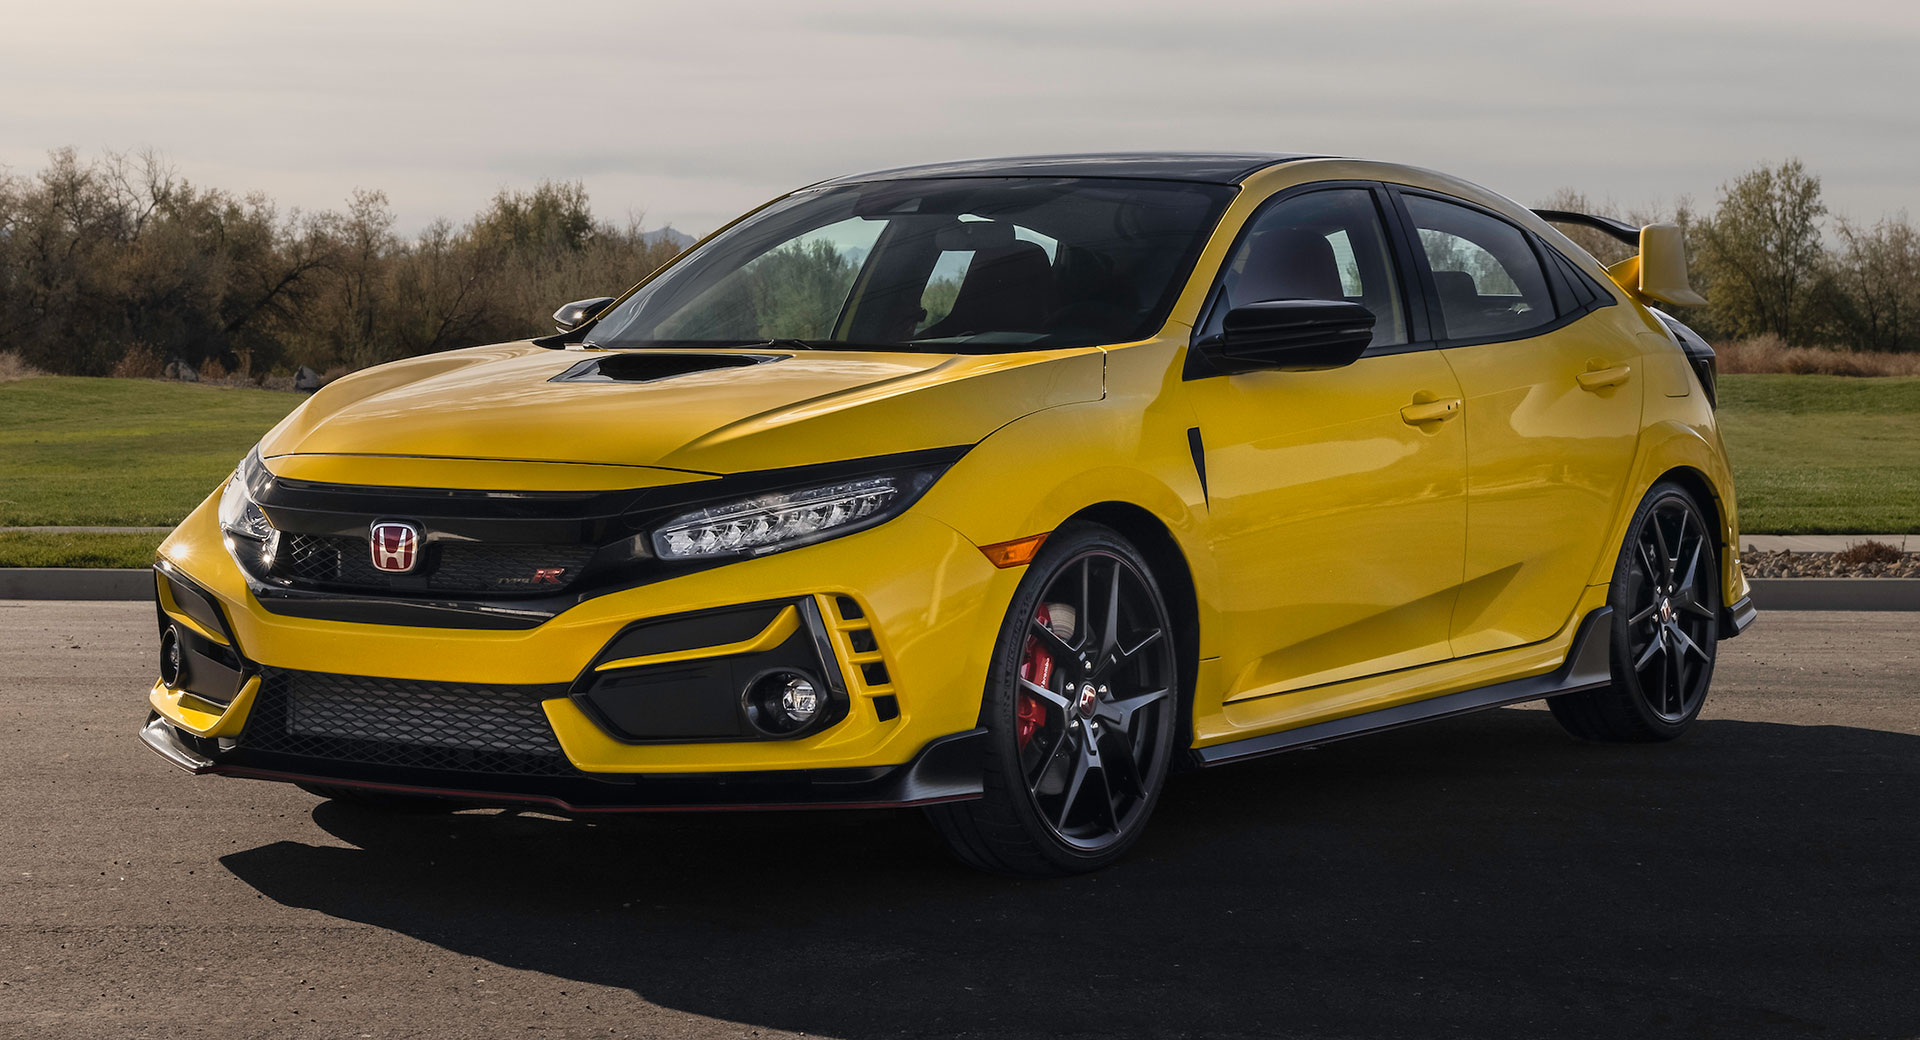 Honda Civic Type R Limited Edition 1a - Auto Recent